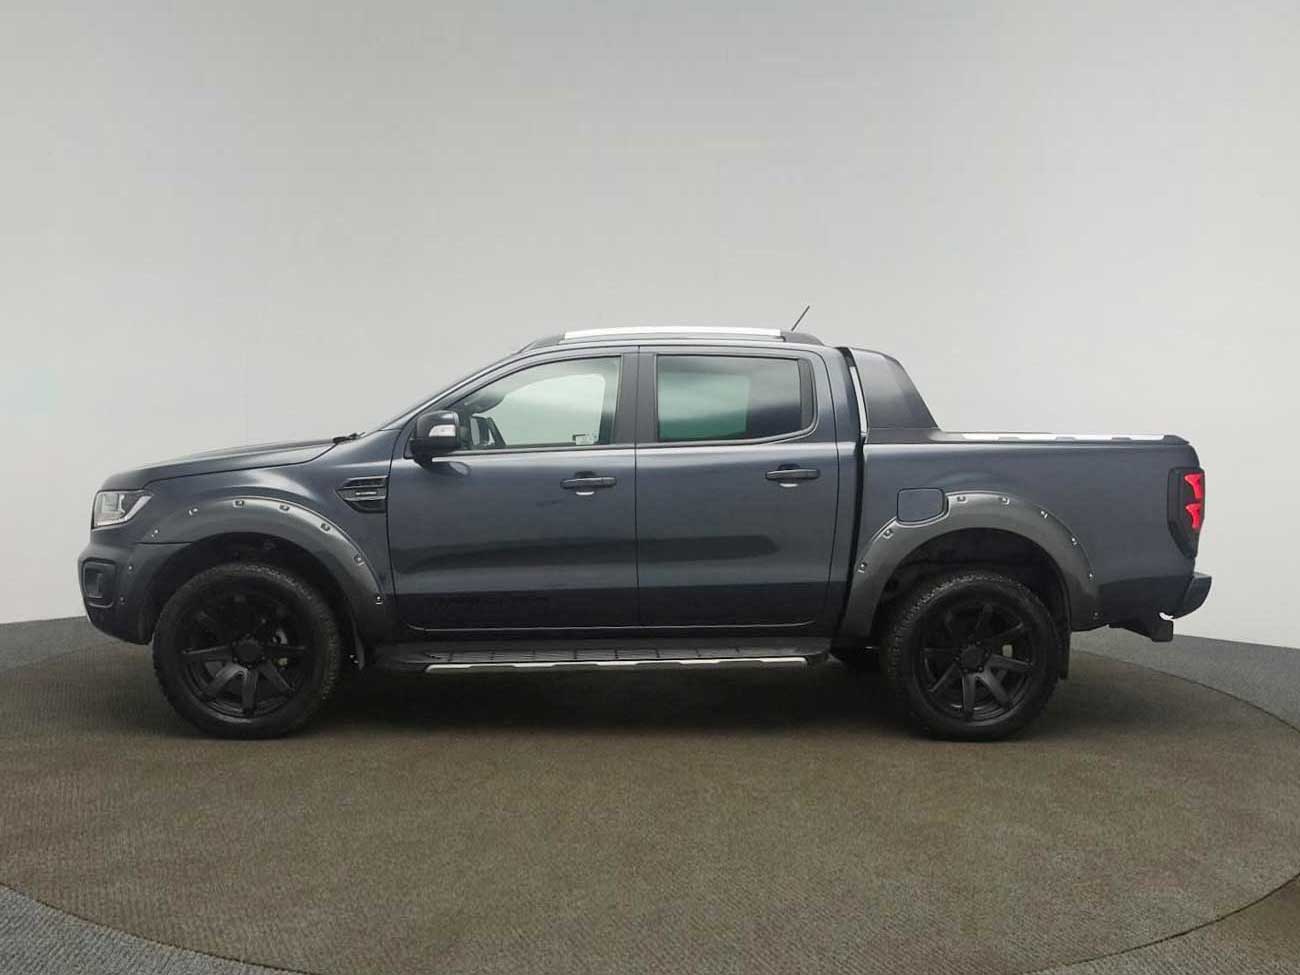 Ford Ranger Double Cab truck